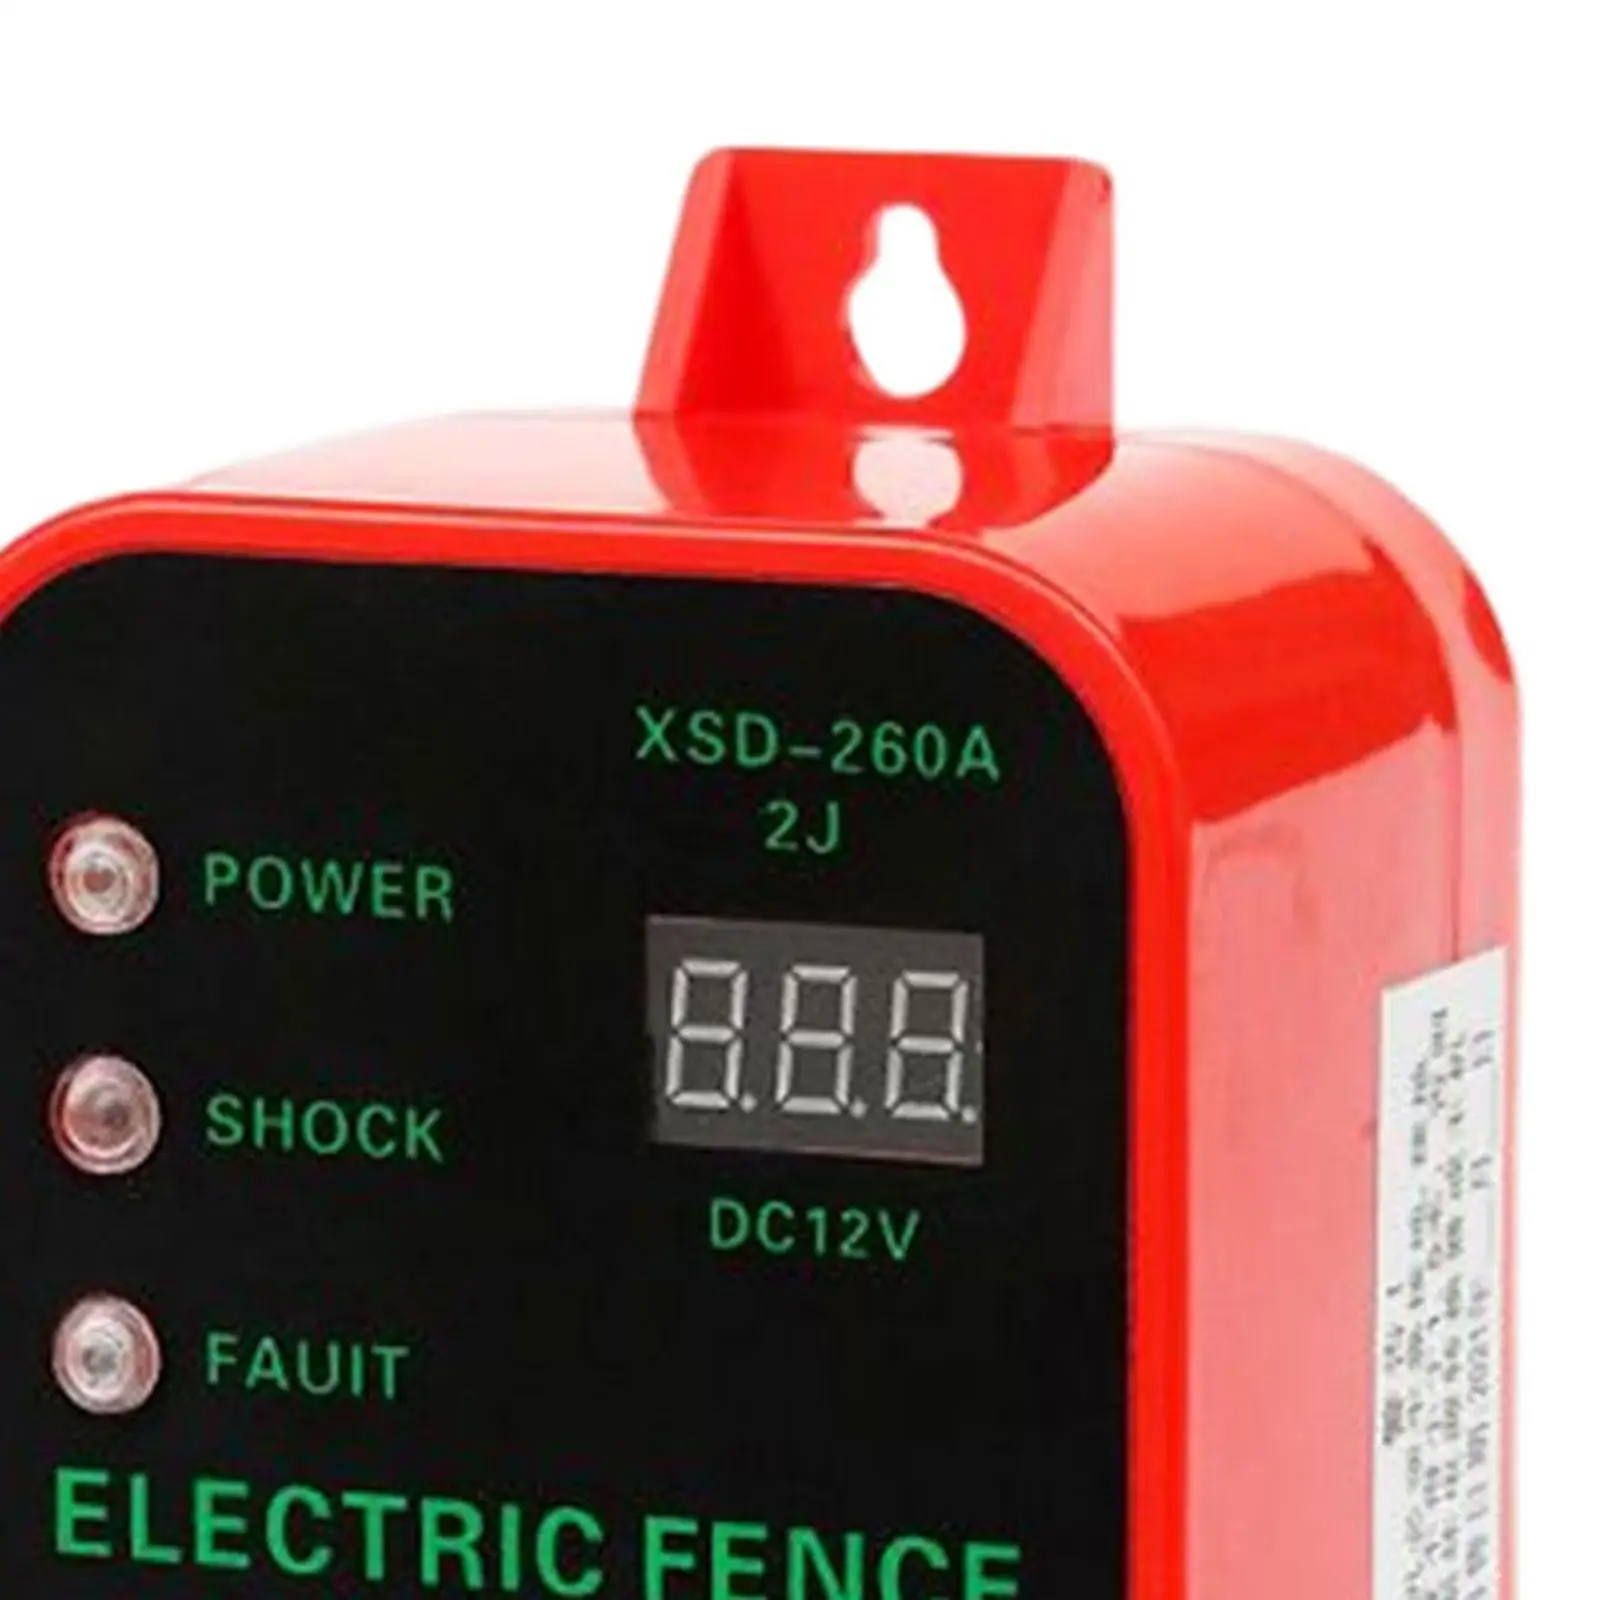 10km Electric Fence Controller Sheep Horse Cattle Poultry Fence Tool LCD Display Waterproof for Livestock Fencing Supplies